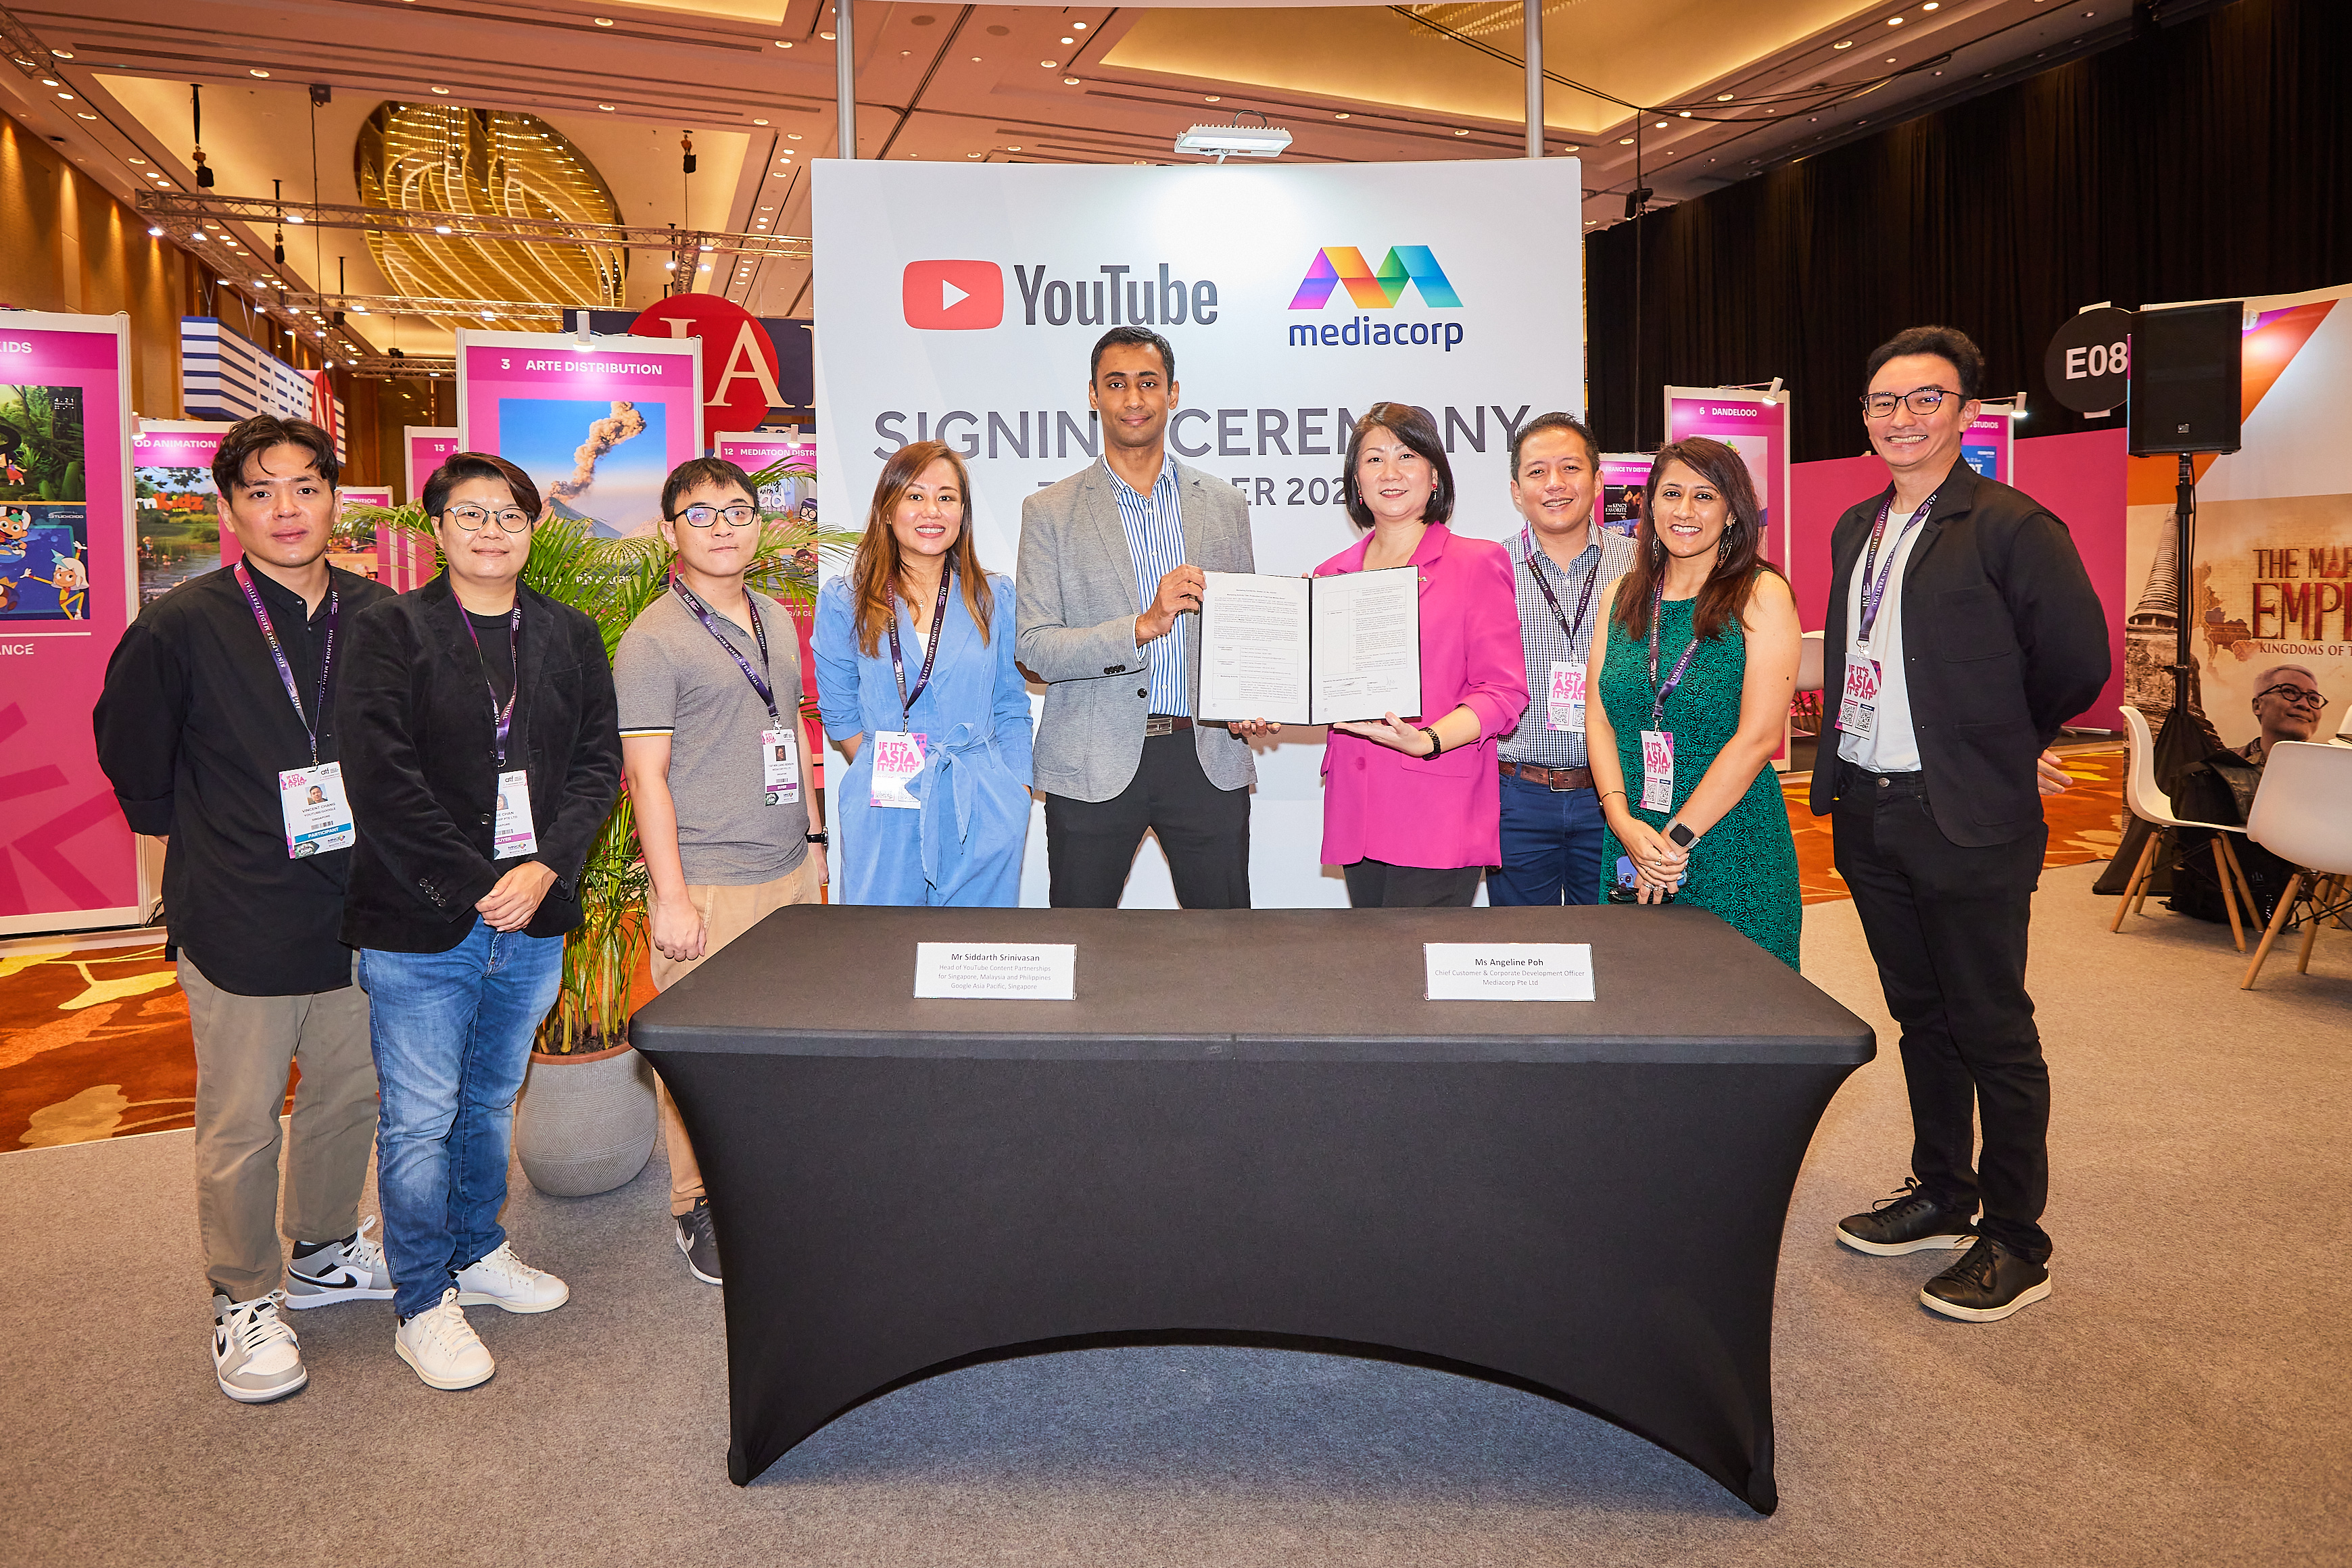 YouTube and Mediacorp